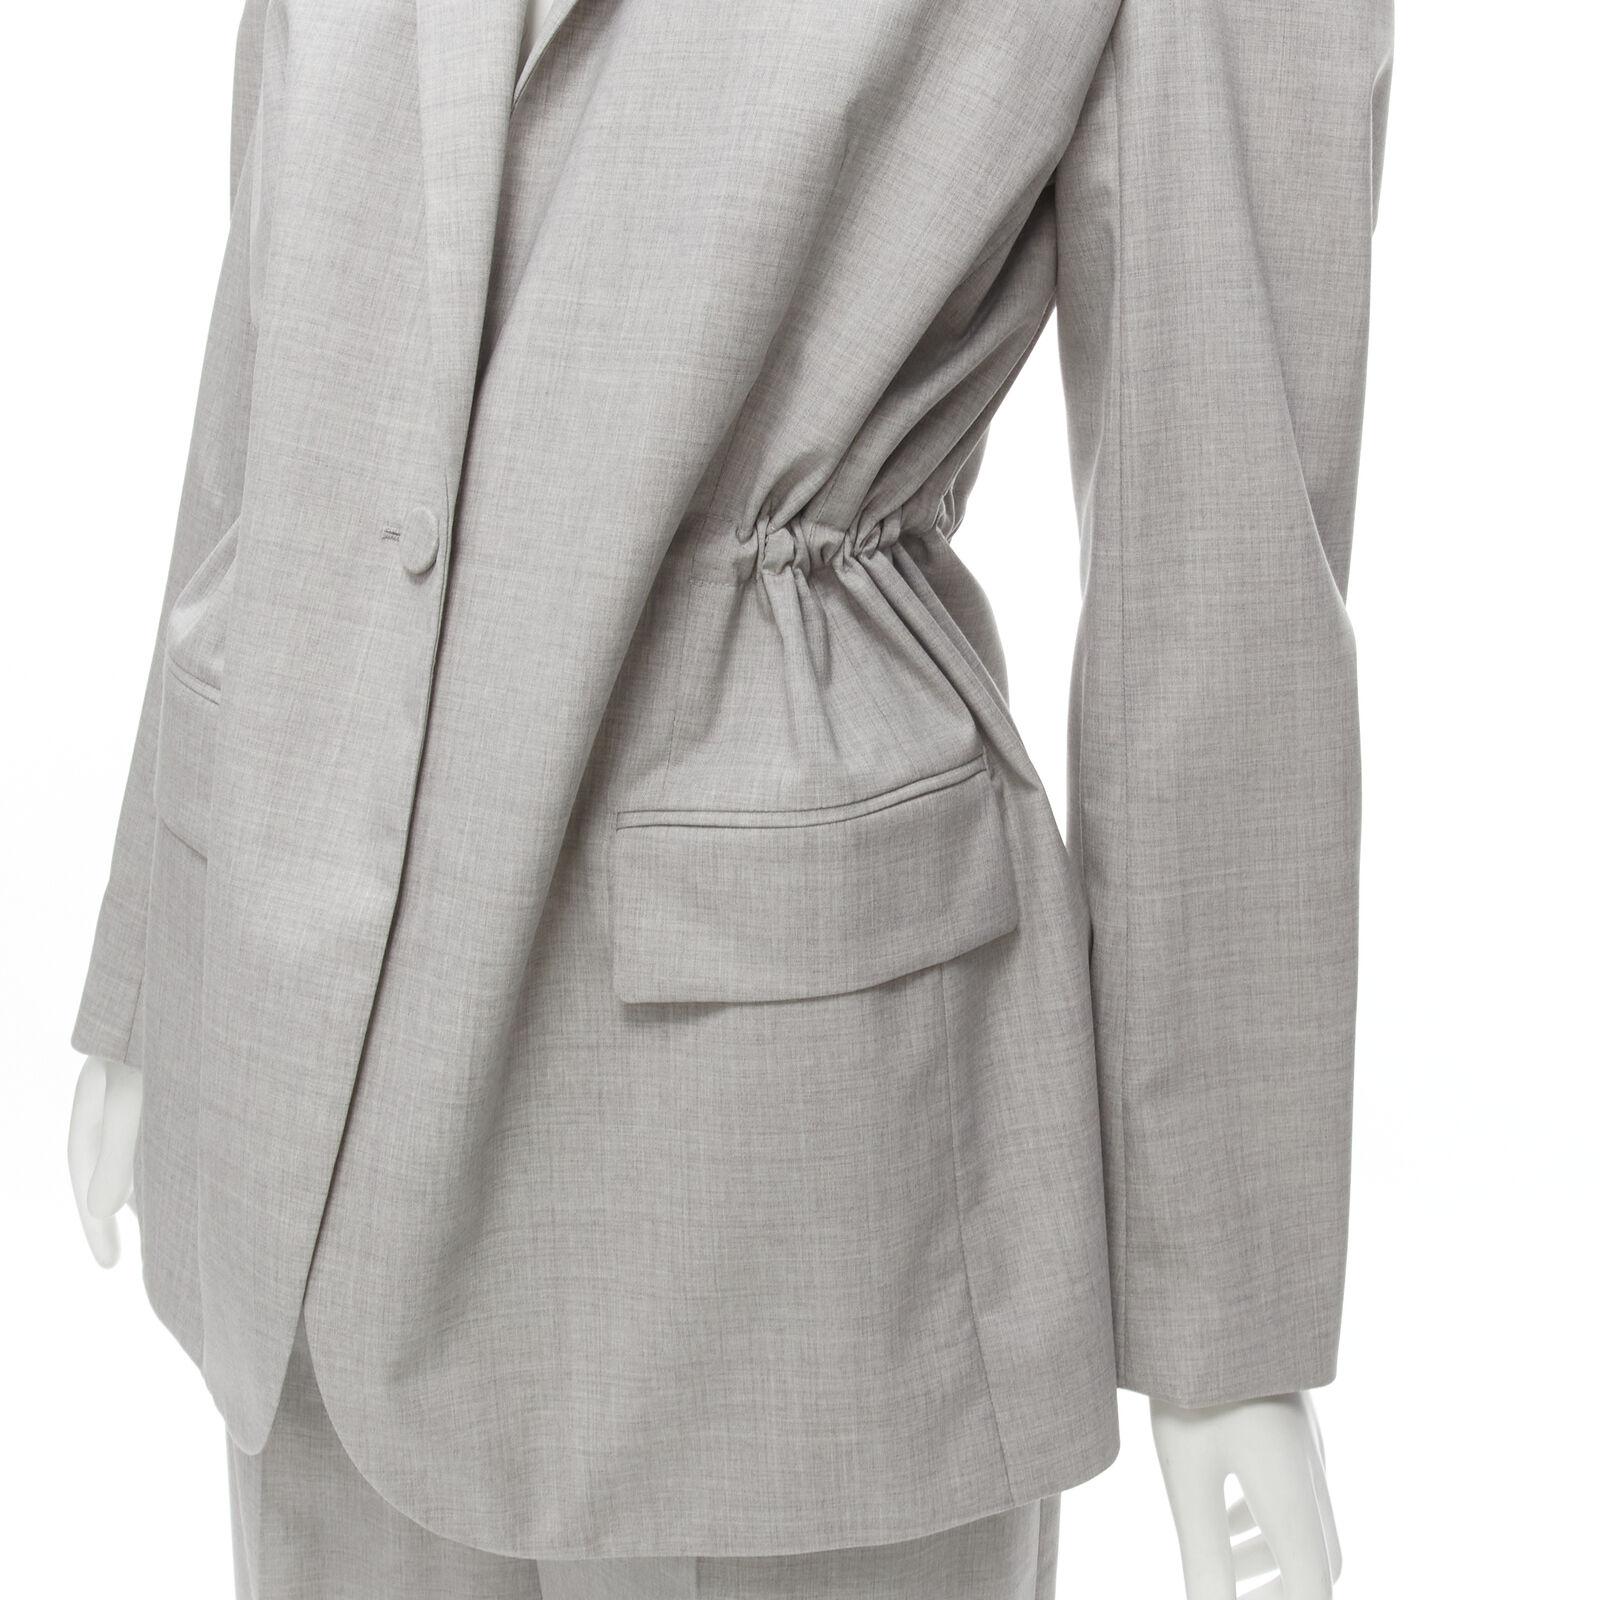 THEORY Drape wool grey drawstring cinched waist blazer wide leg pants set US6 S
Reference: KNLM/A00039
Brand: Theory
Model: Drape
Material: 100% Wool
Color: Grey
Pattern: Solid
Closure: Button
Made in: China

CONDITION:
Condition: Excellent, this